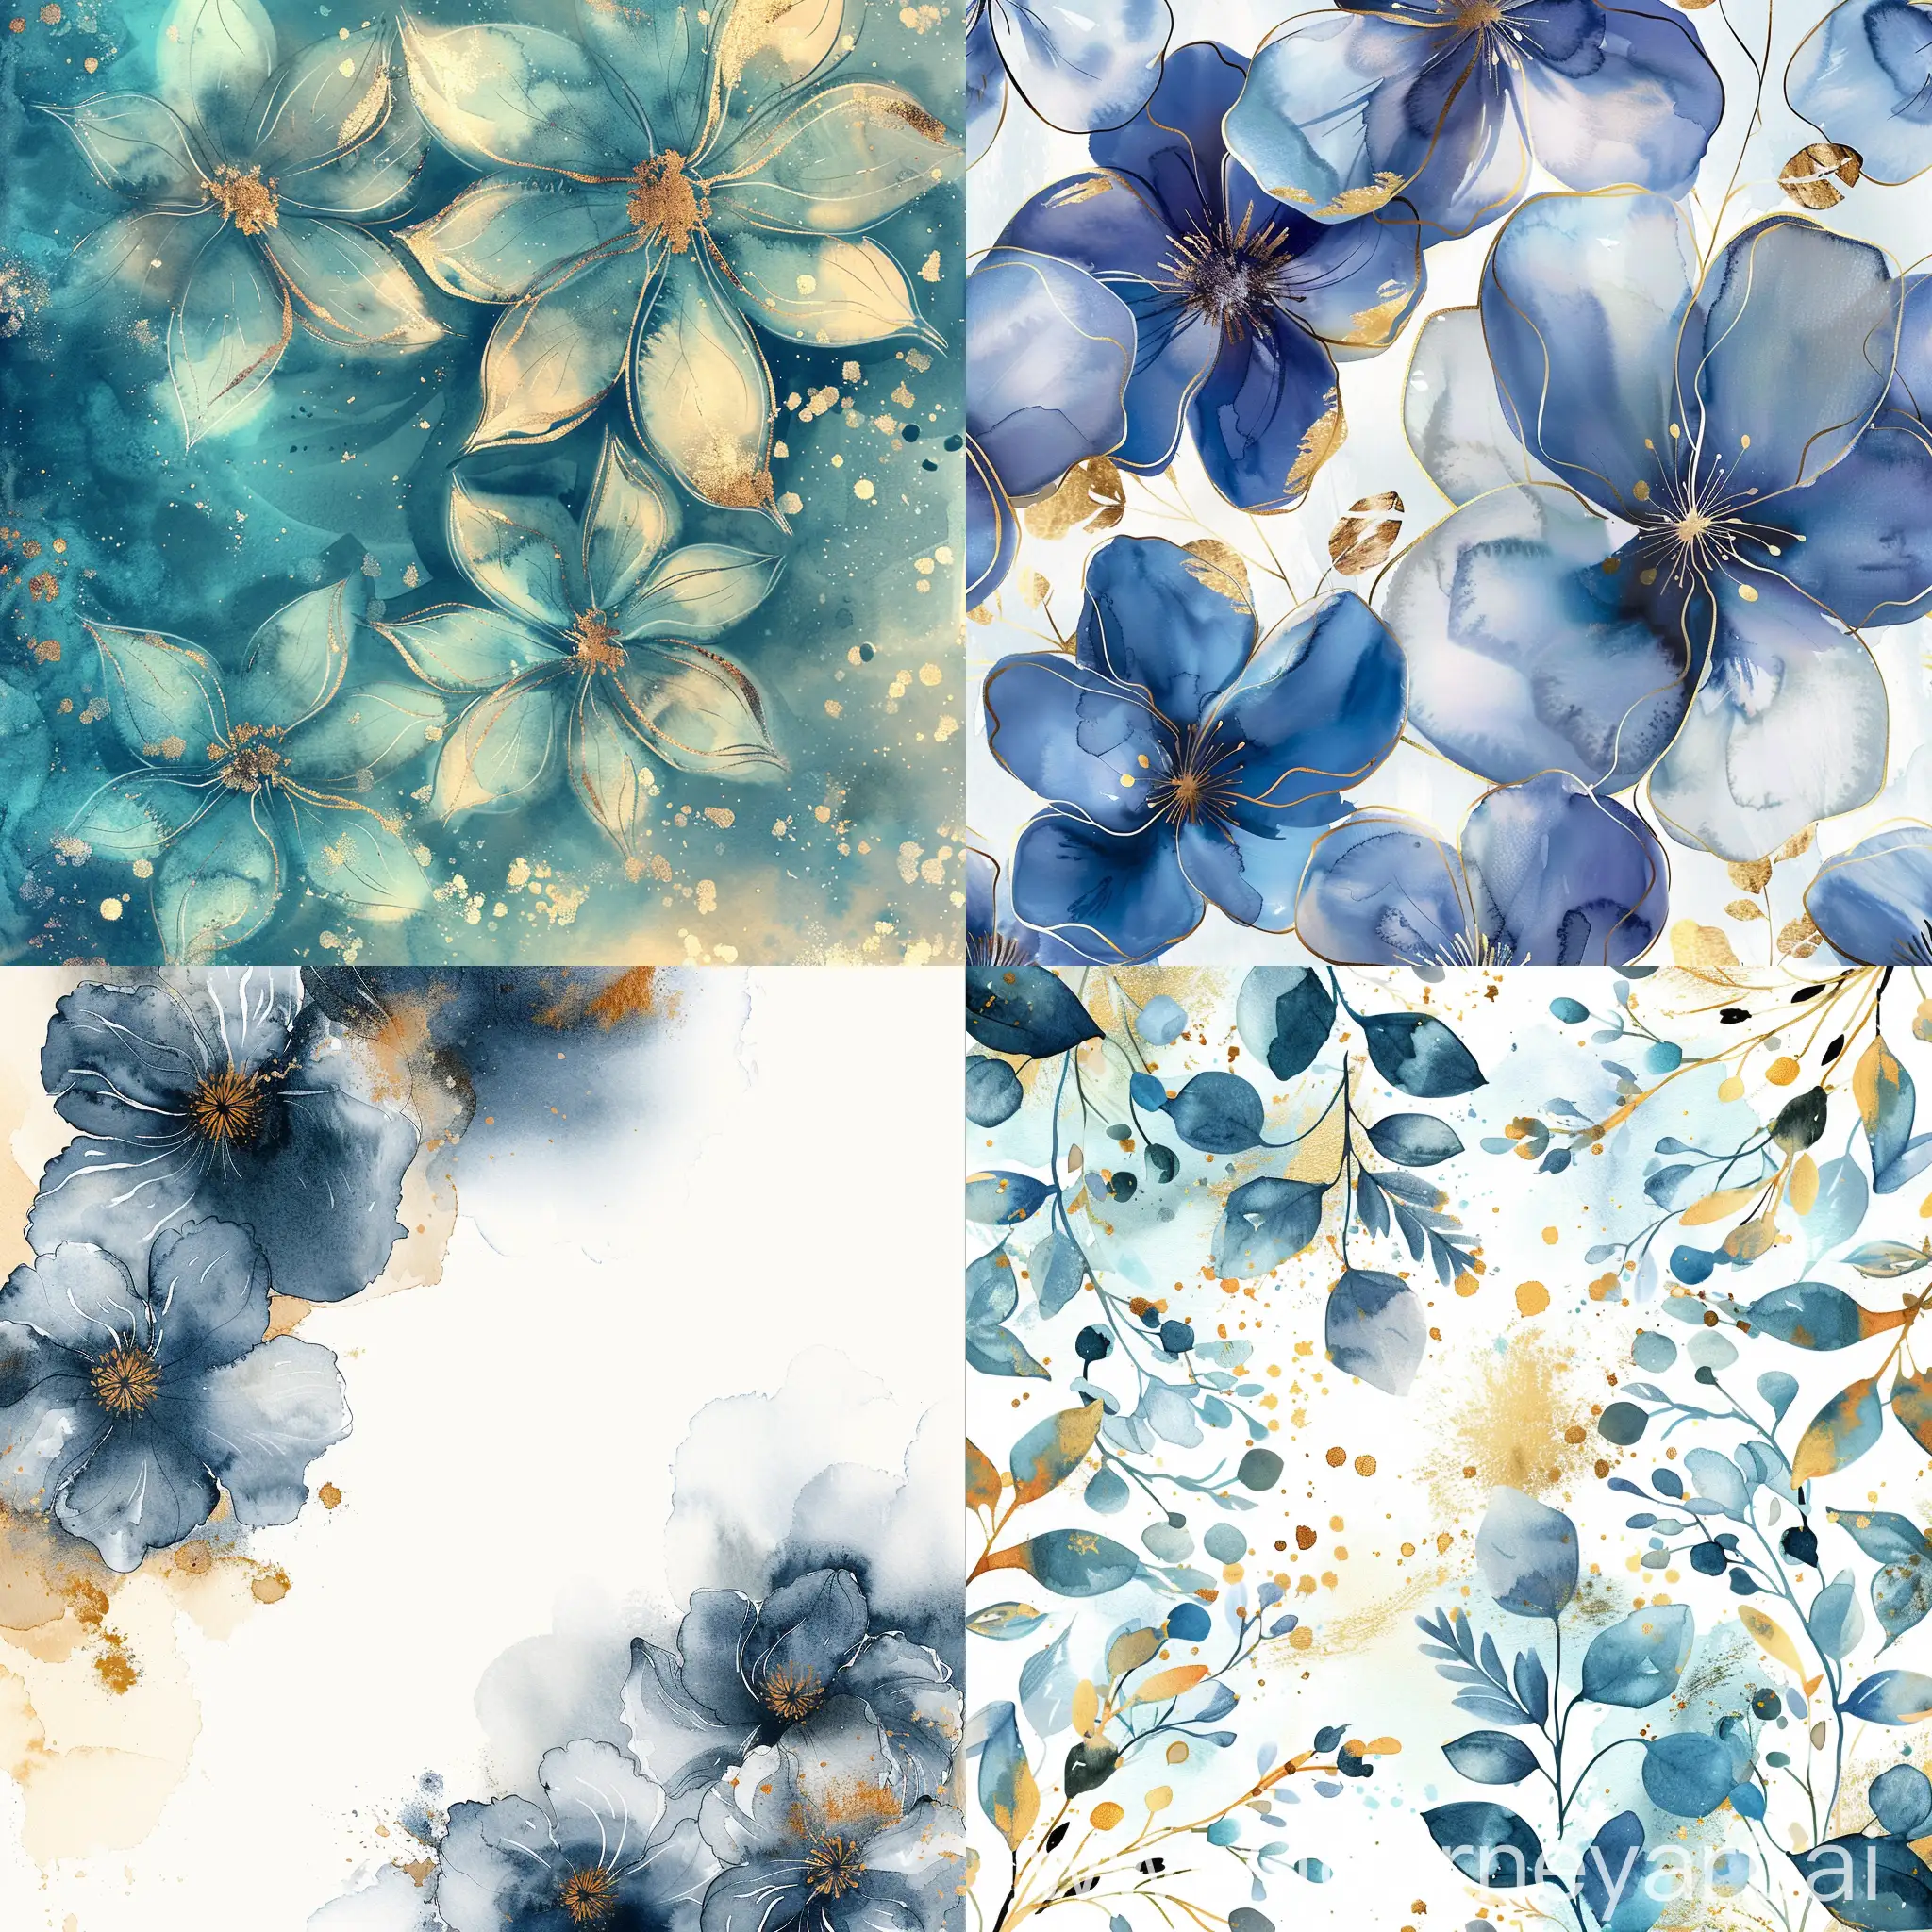 Beautiful-Fantasy-Floral-Watercolor-Art-in-Blue-and-Gold